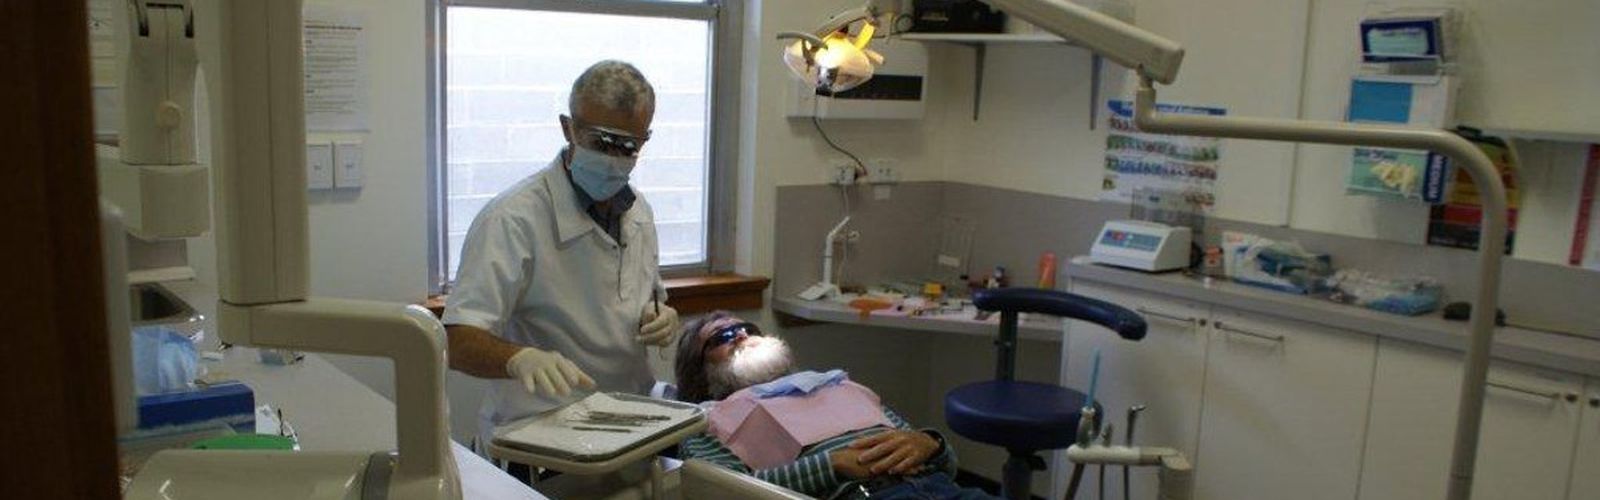 Flying Doctor supports improved dental health services